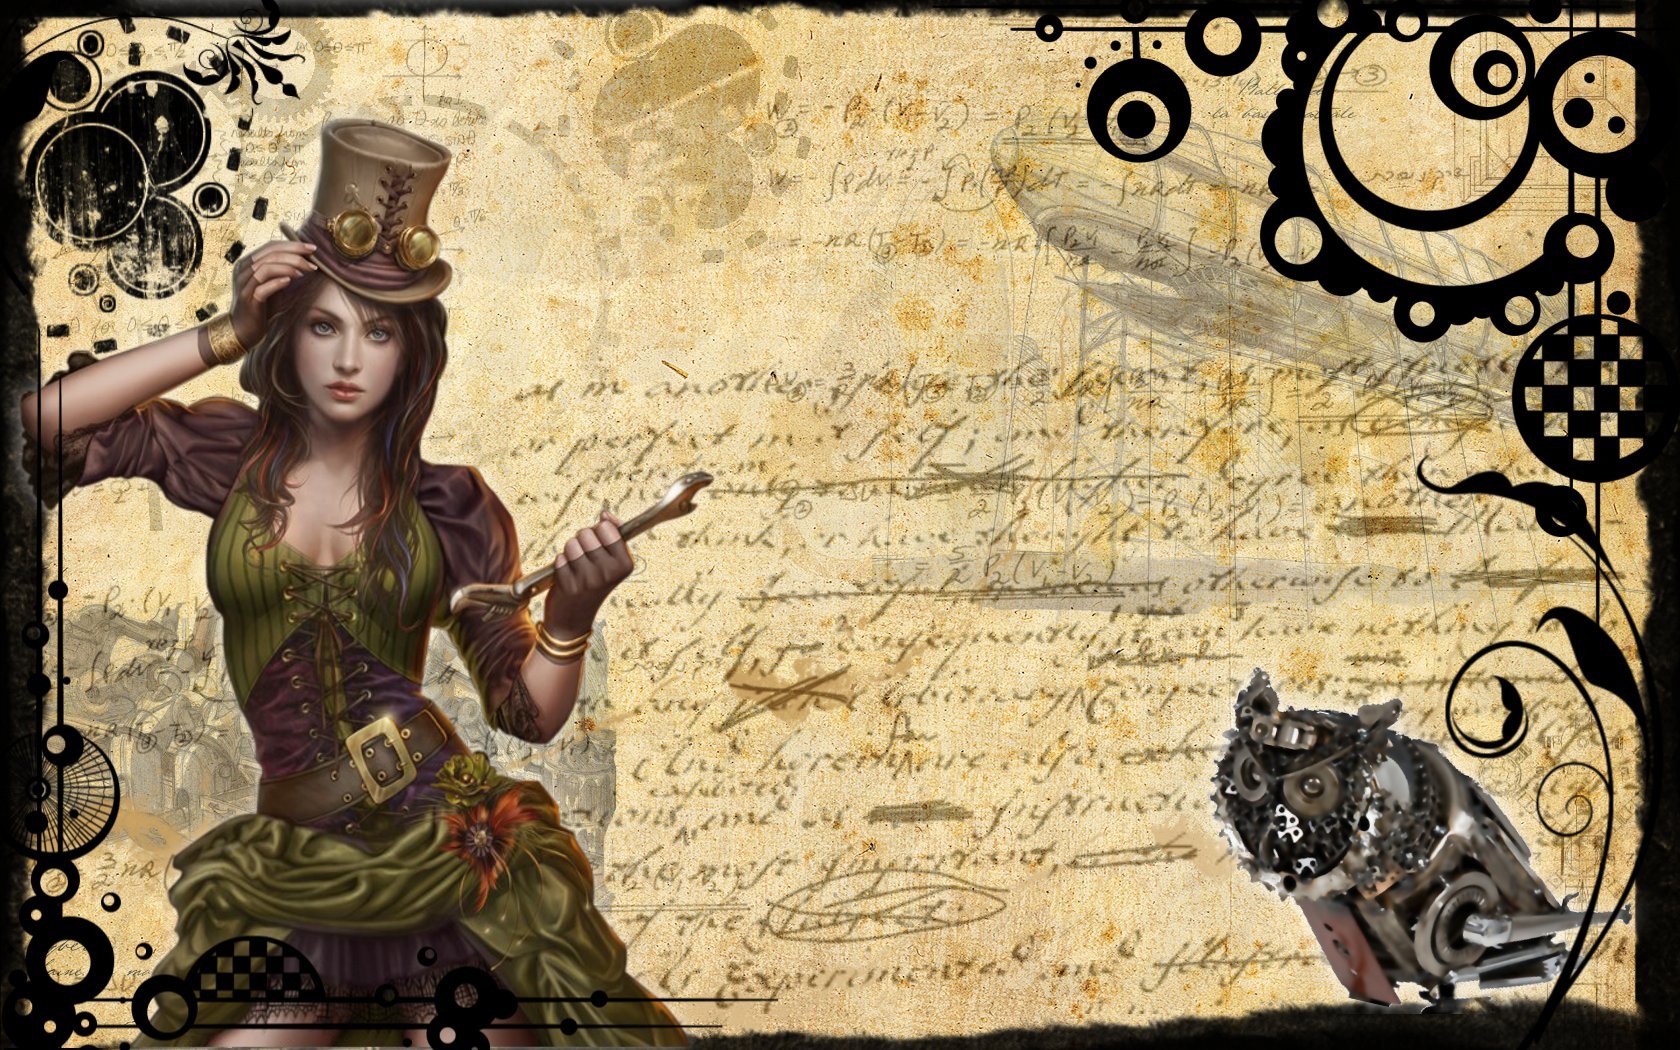 Download SteamPunk Wallpapers Pictures Photos and Backgrounds